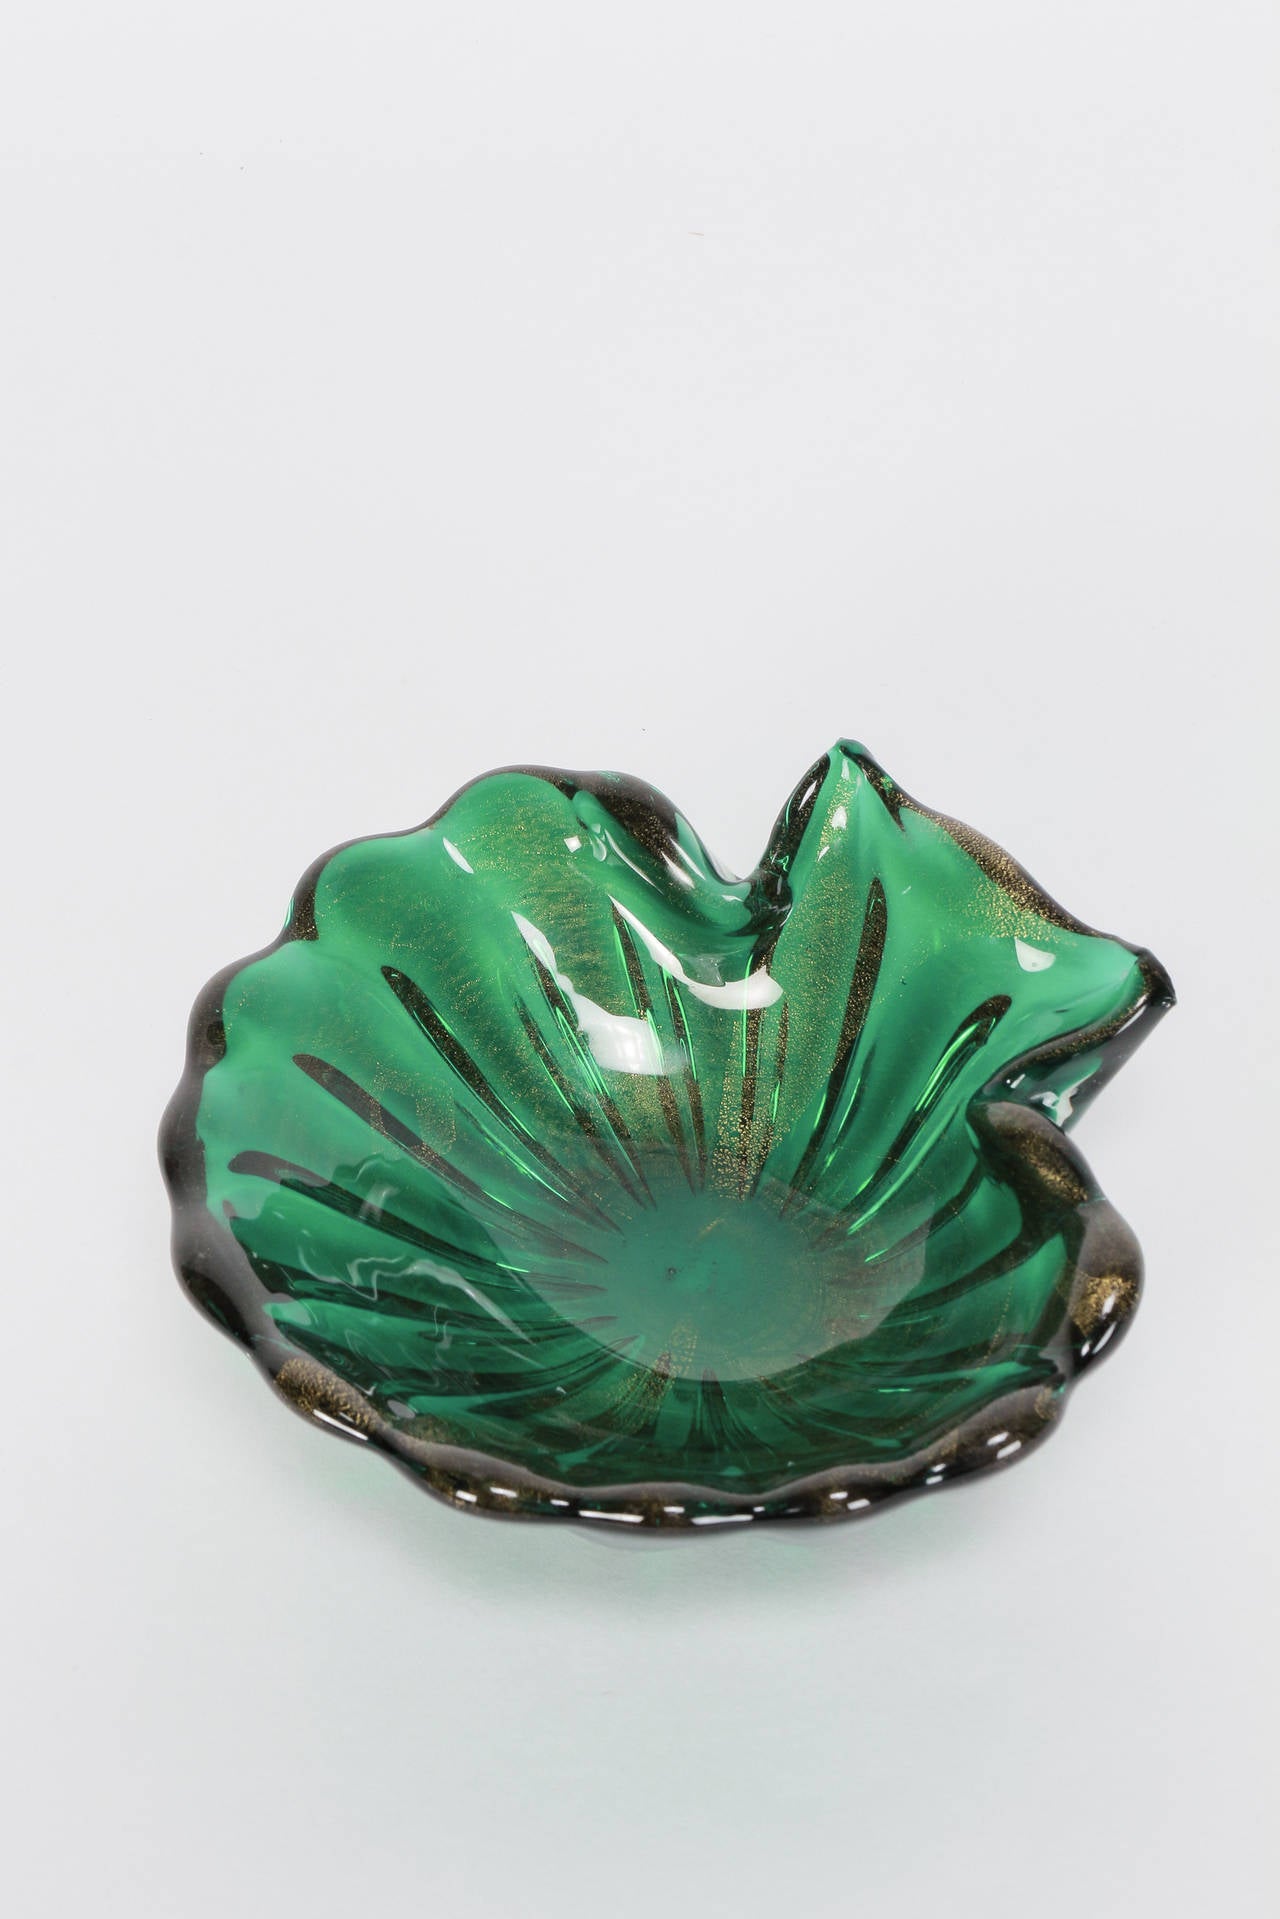 Mid-Century Modern Green Gold Italian Murano Shell Bowl in the style of Barovier & Toso, 1960s For Sale